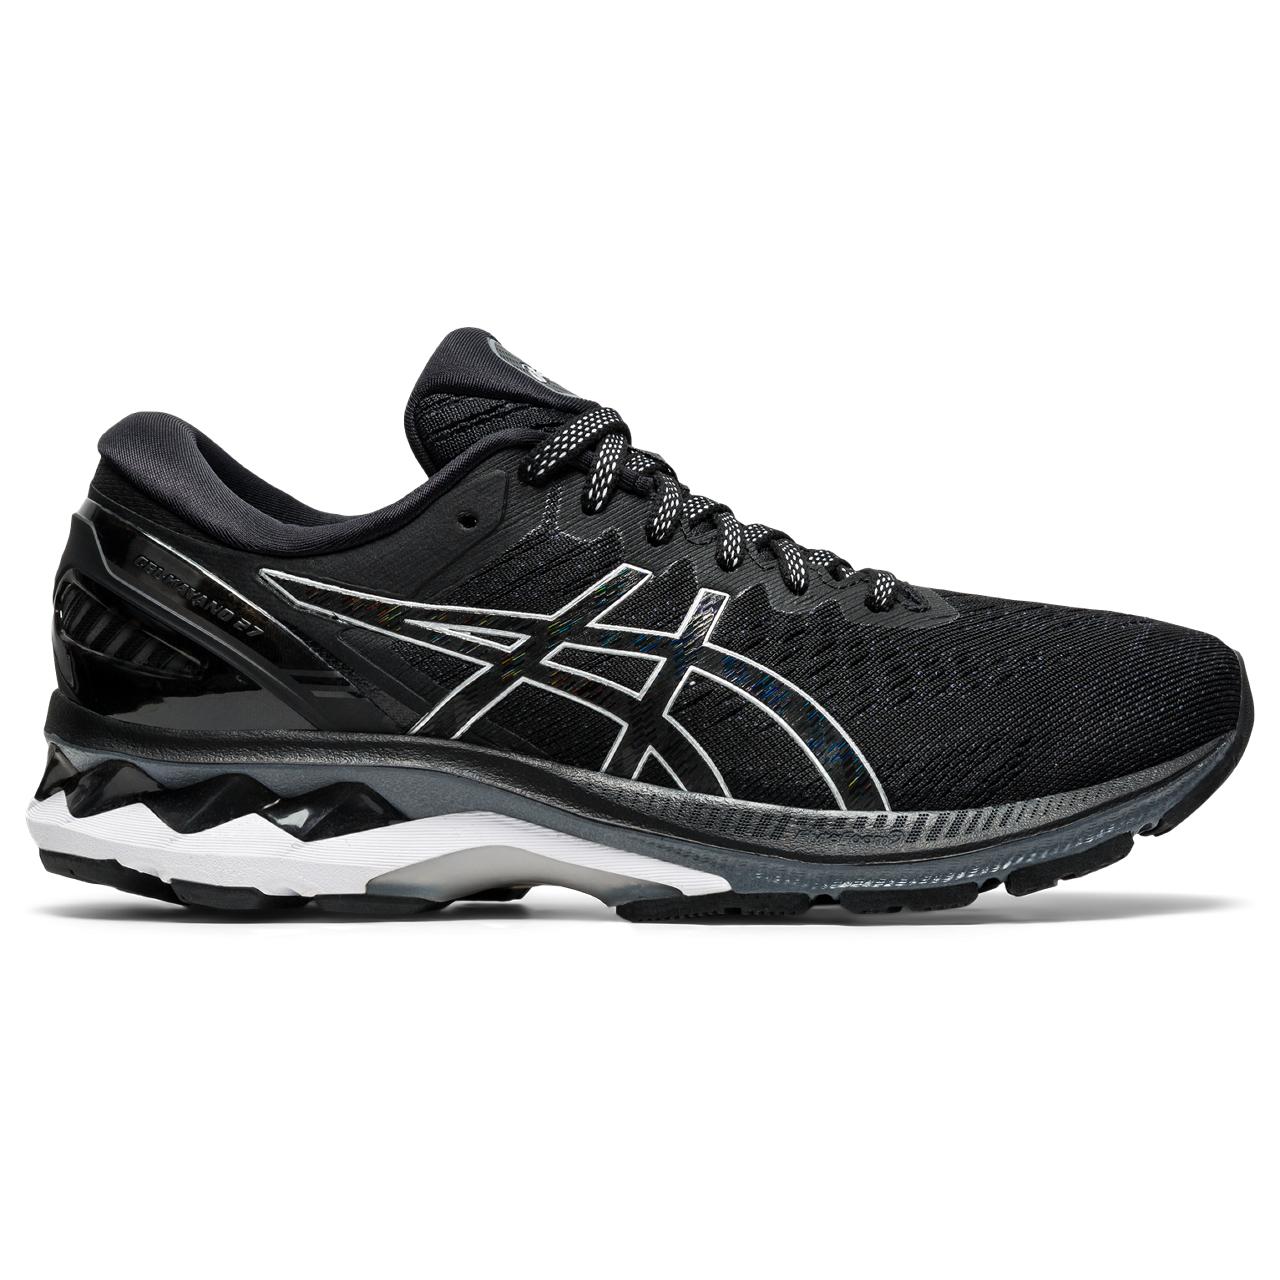 The ASICS Kayano has been our best-selling style at Frontrunners for a long time.  The newest version # 27 will not disappoint.  It's redesigned mesh upper helps keep feet cool, while the sole is more flexible to help promote a more natural roll through the gait cycle. 